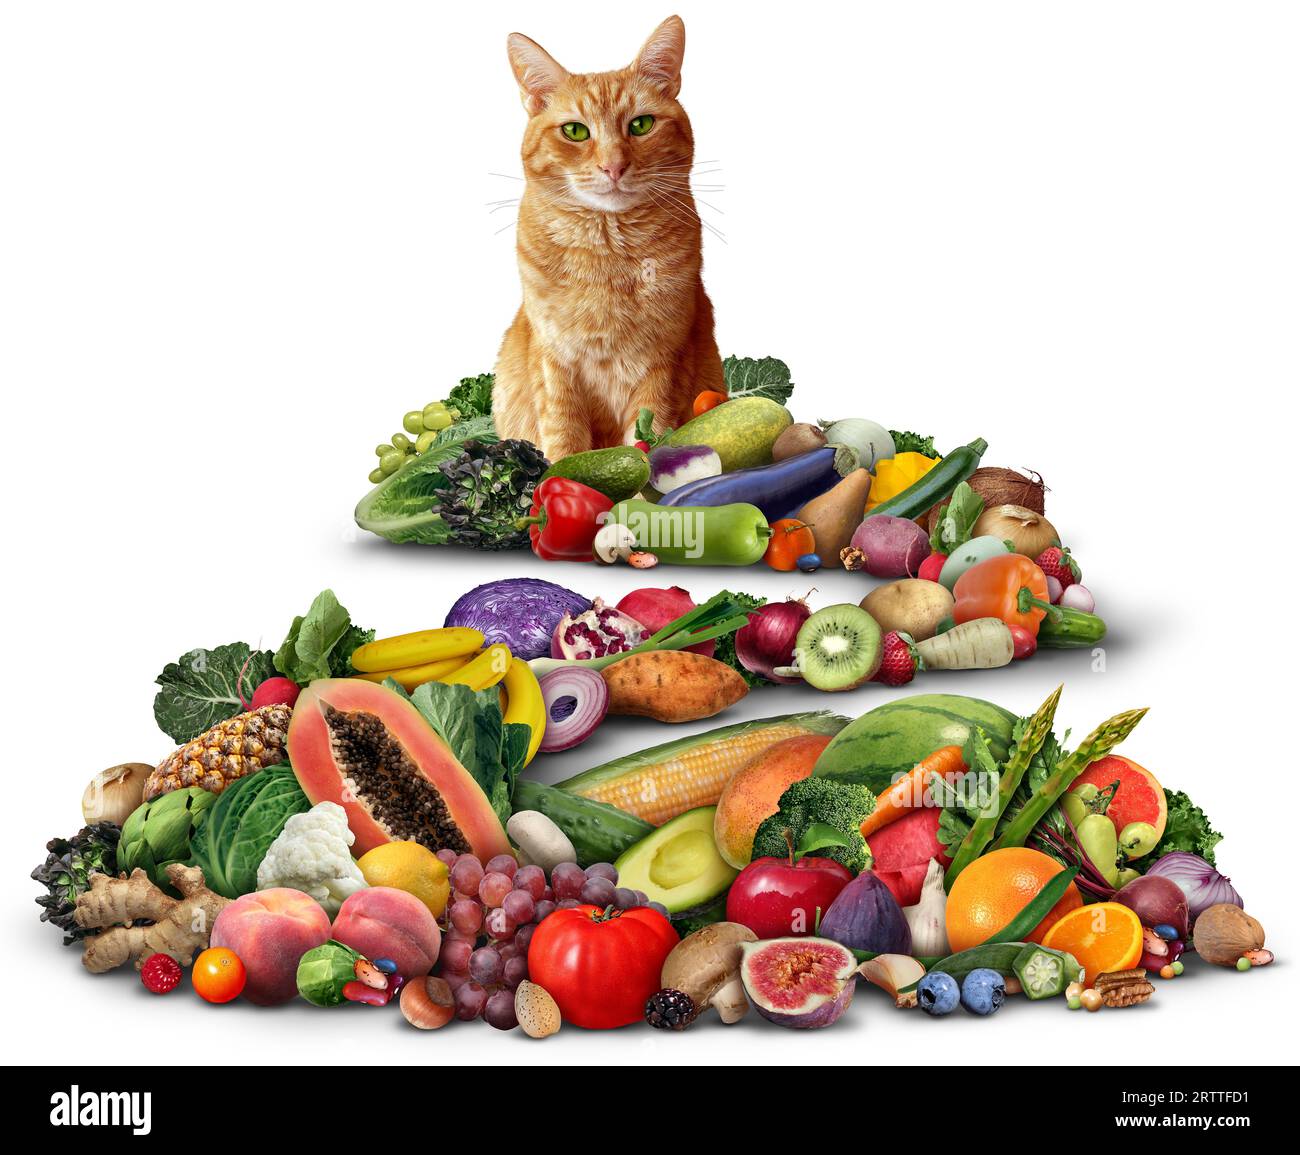 Vegetarian Cat Diet and Feline Vegan Diet and health benefits of cats eating fruits and vegetables for plant-based diets as a green alternative meal f Stock Photo